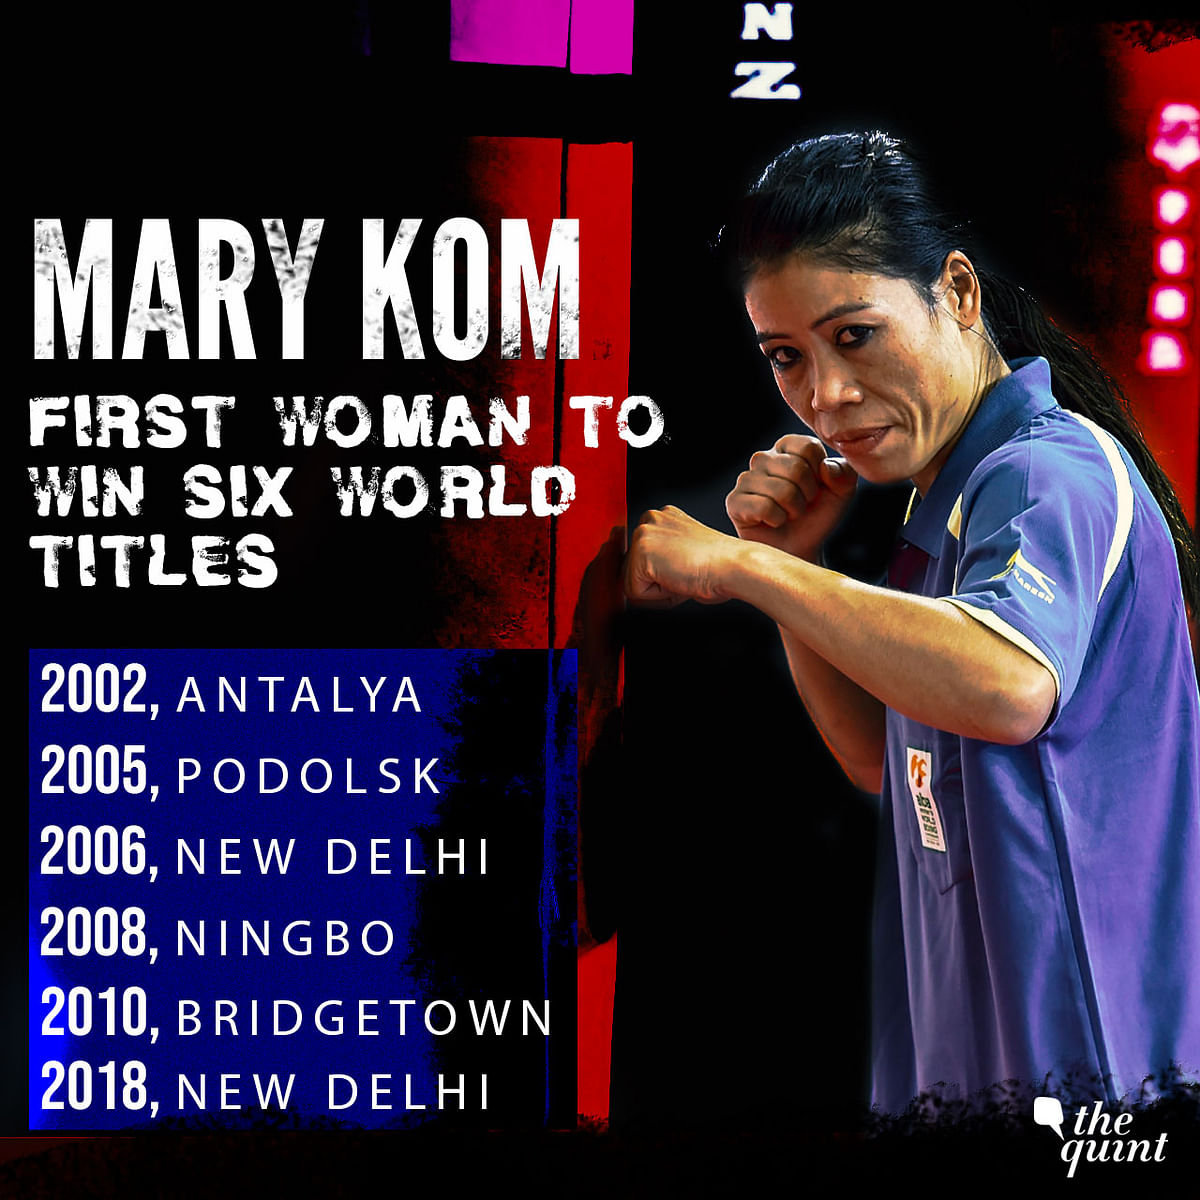 The Indian legend becomes the first female boxer to win six World Championship titles with victory in New Delhi